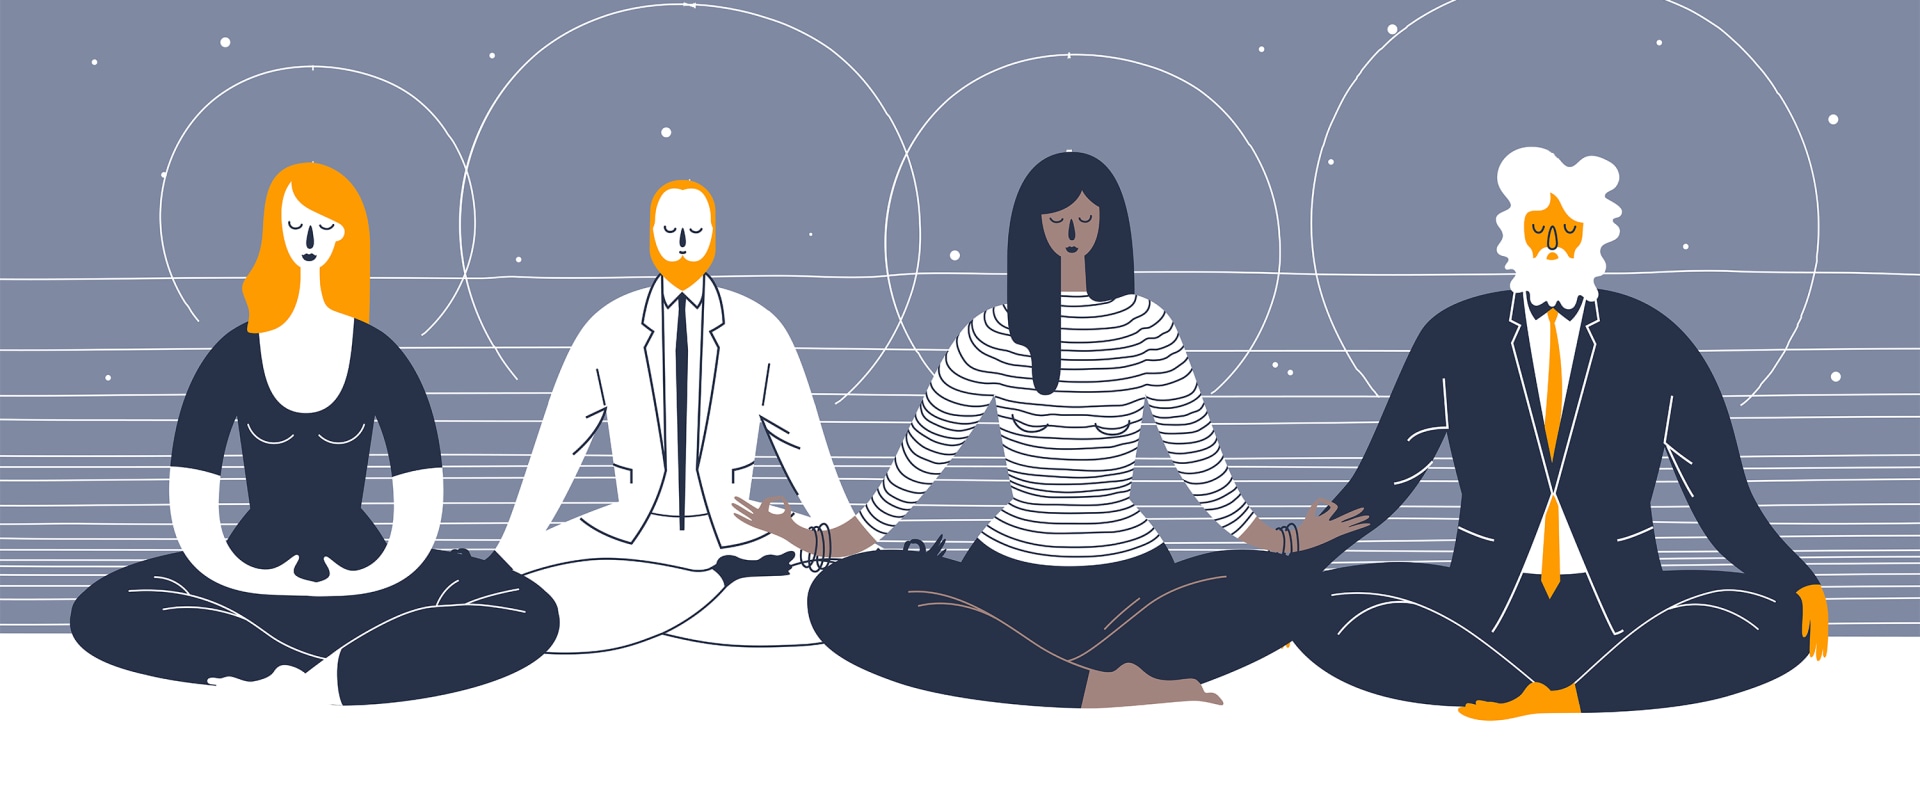 4 Mindfulness Techniques to Help You Find Inner Peace